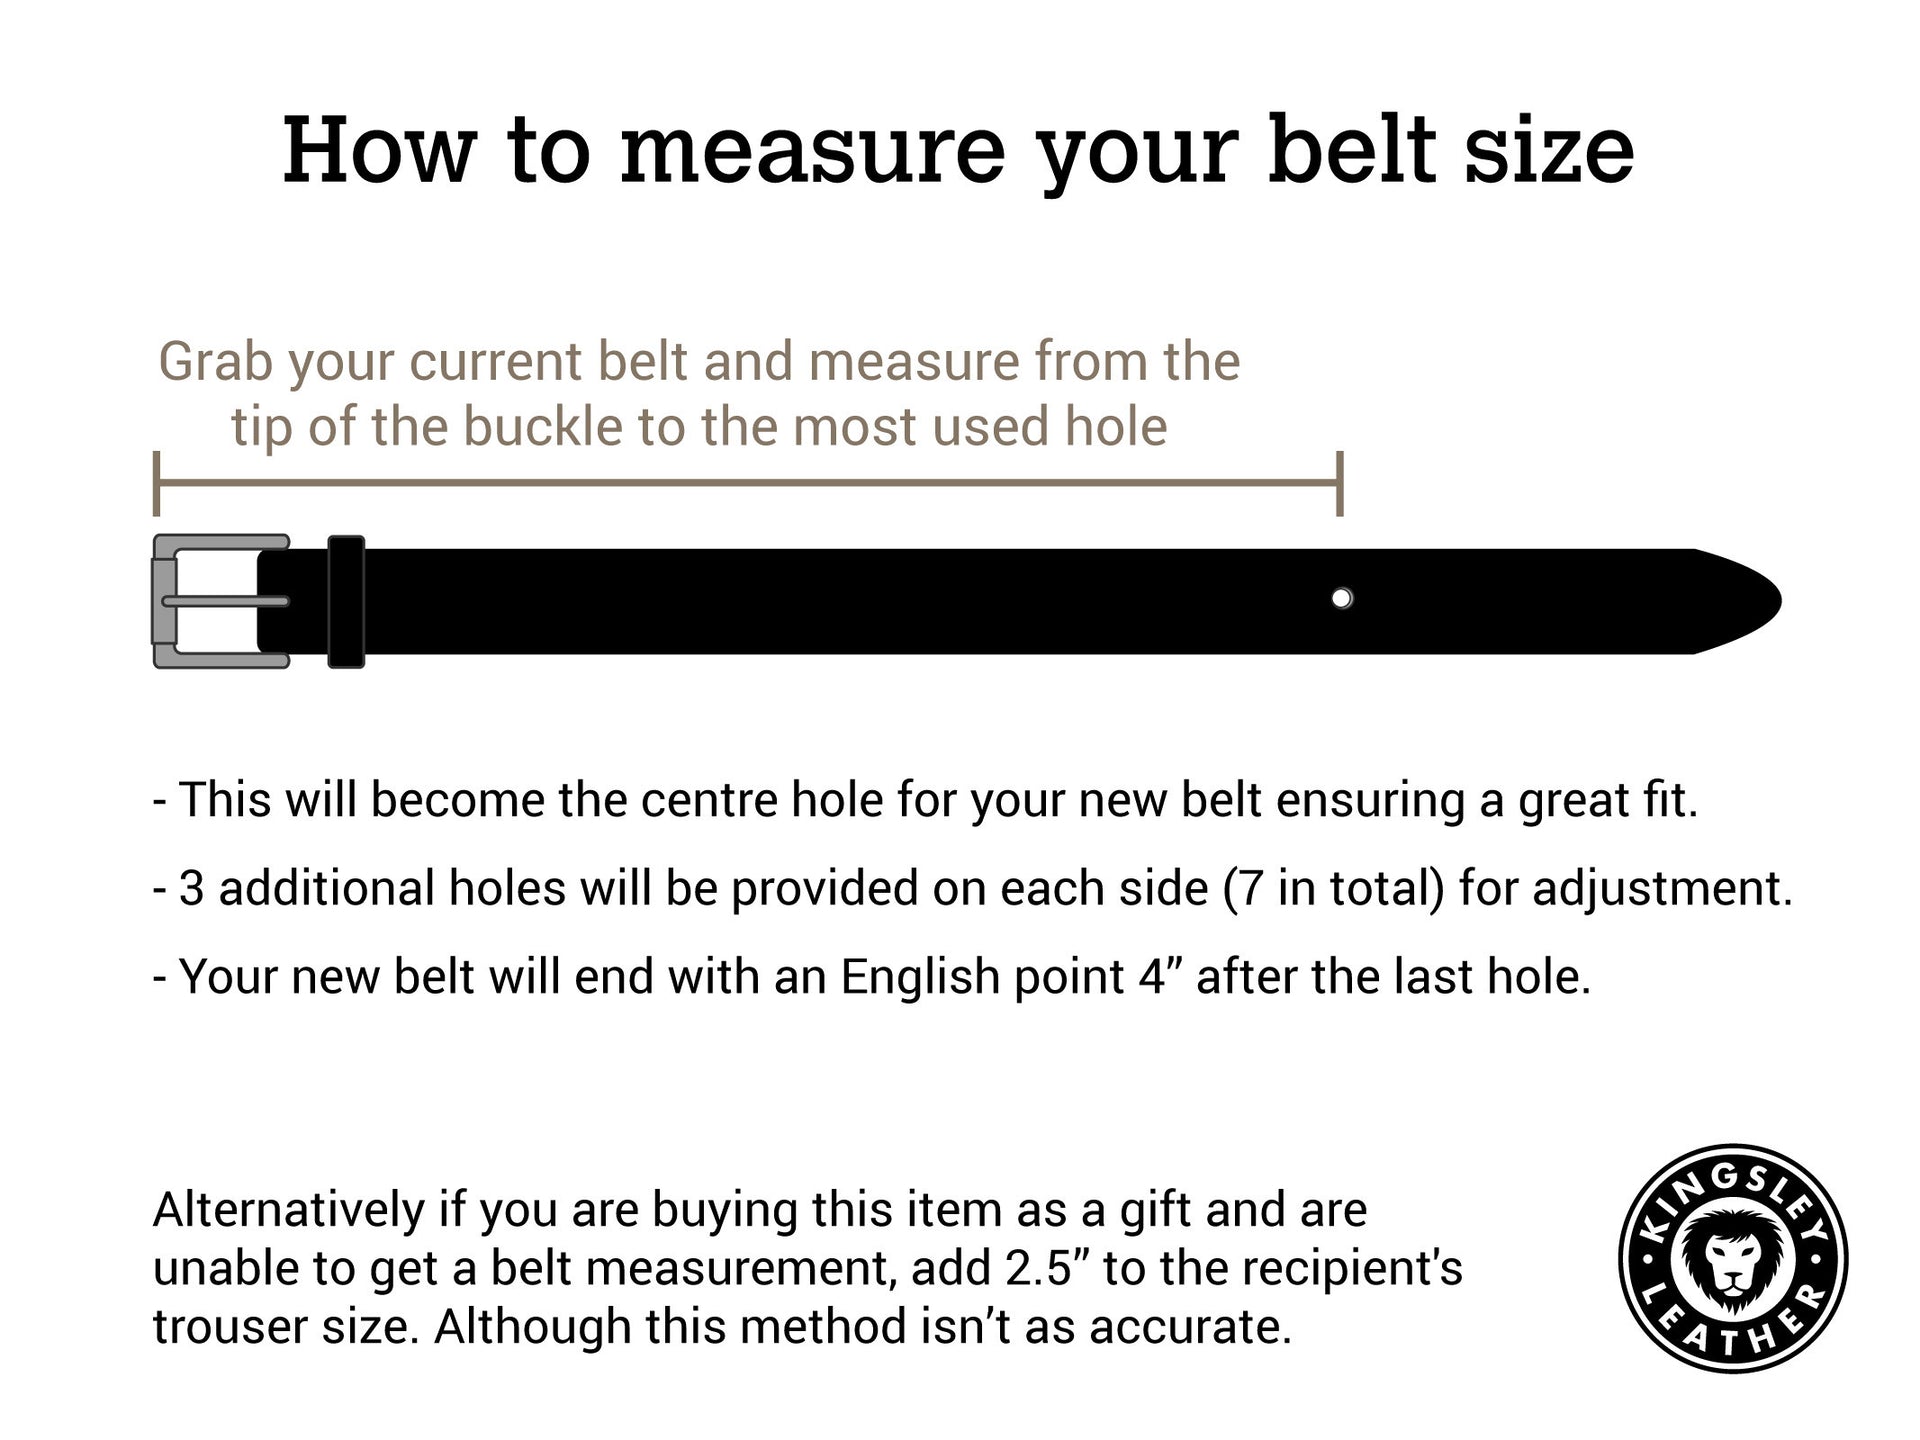 How to measure your belt size...